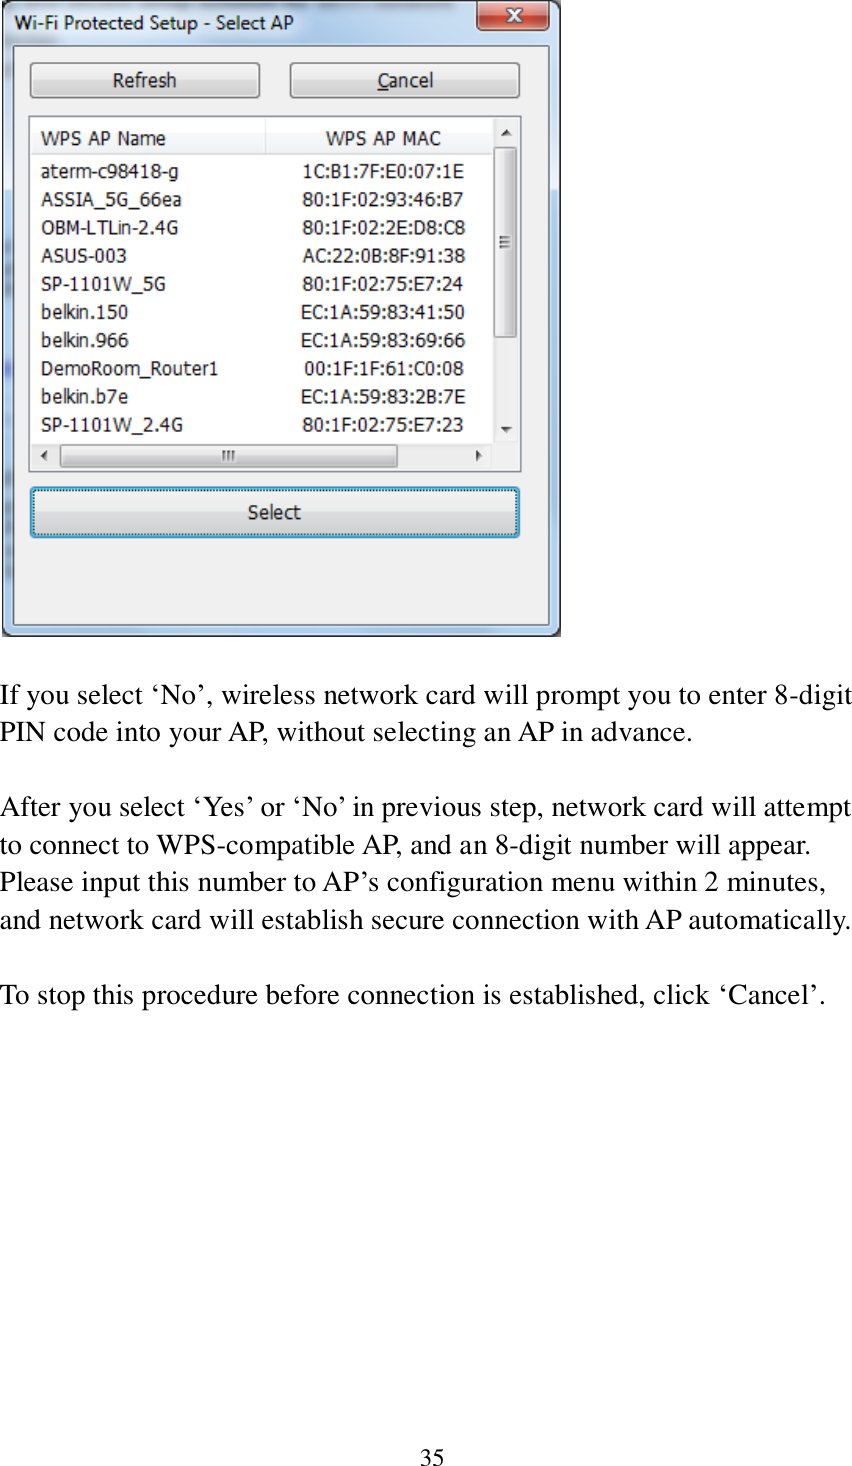 35      If you select ‘No’, wireless network card will prompt you to enter 8-digit PIN code into your AP, without selecting an AP in advance.  After you select ‘Yes’ or ‘No’ in previous step, network card will attempt to connect to WPS-compatible AP, and an 8-digit number will appear. Please input this number to AP’s configuration menu within 2 minutes, and network card will establish secure connection with AP automatically.  To stop this procedure before connection is established, click ‘Cancel’.  